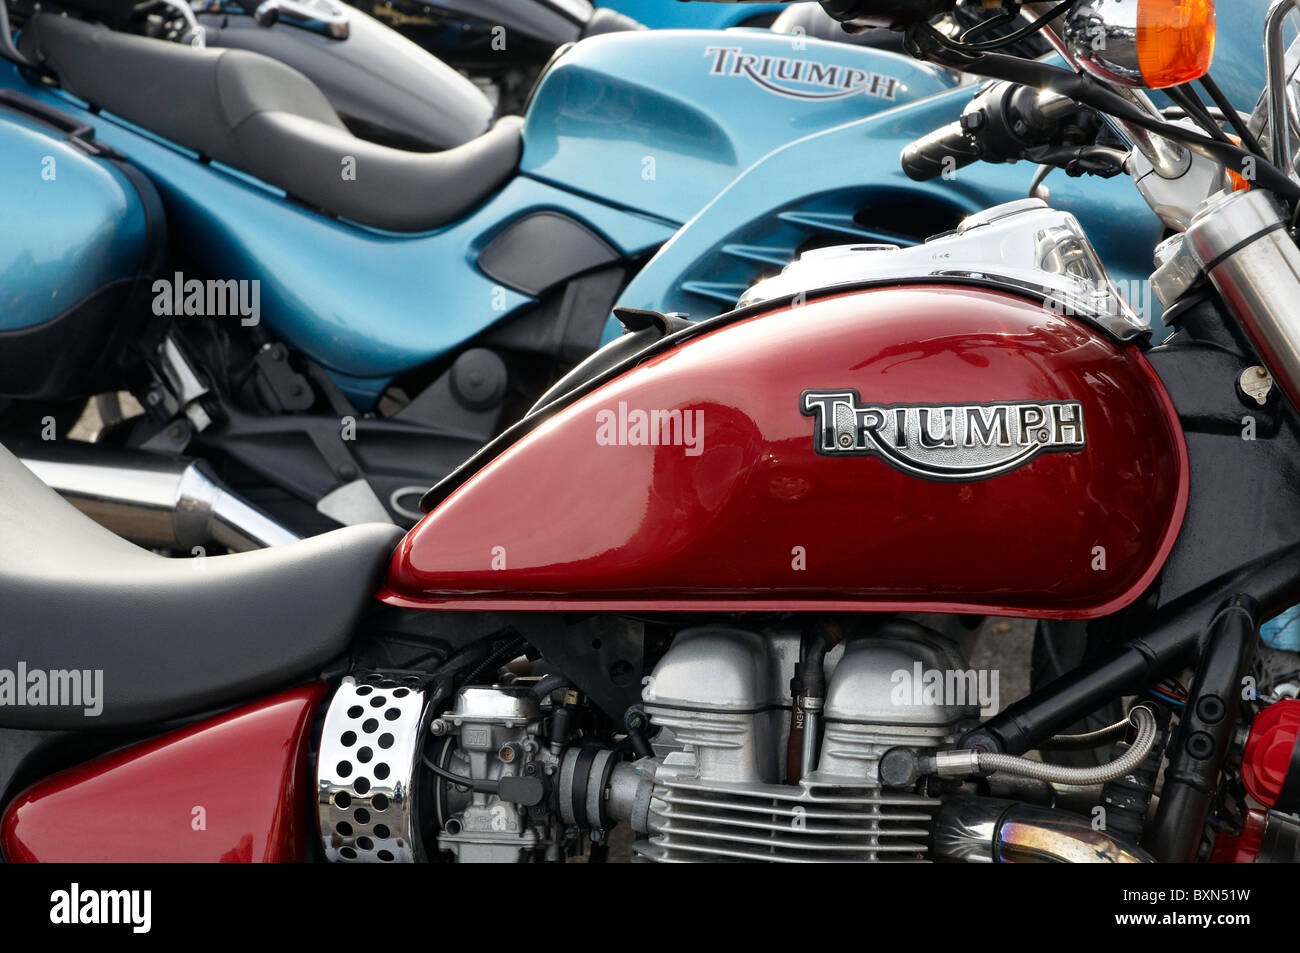 Triumph motorcycles on display at the annual Boxing Day vintage and custom vehicle show, Wickham, Hampshire, England. Stock Photo